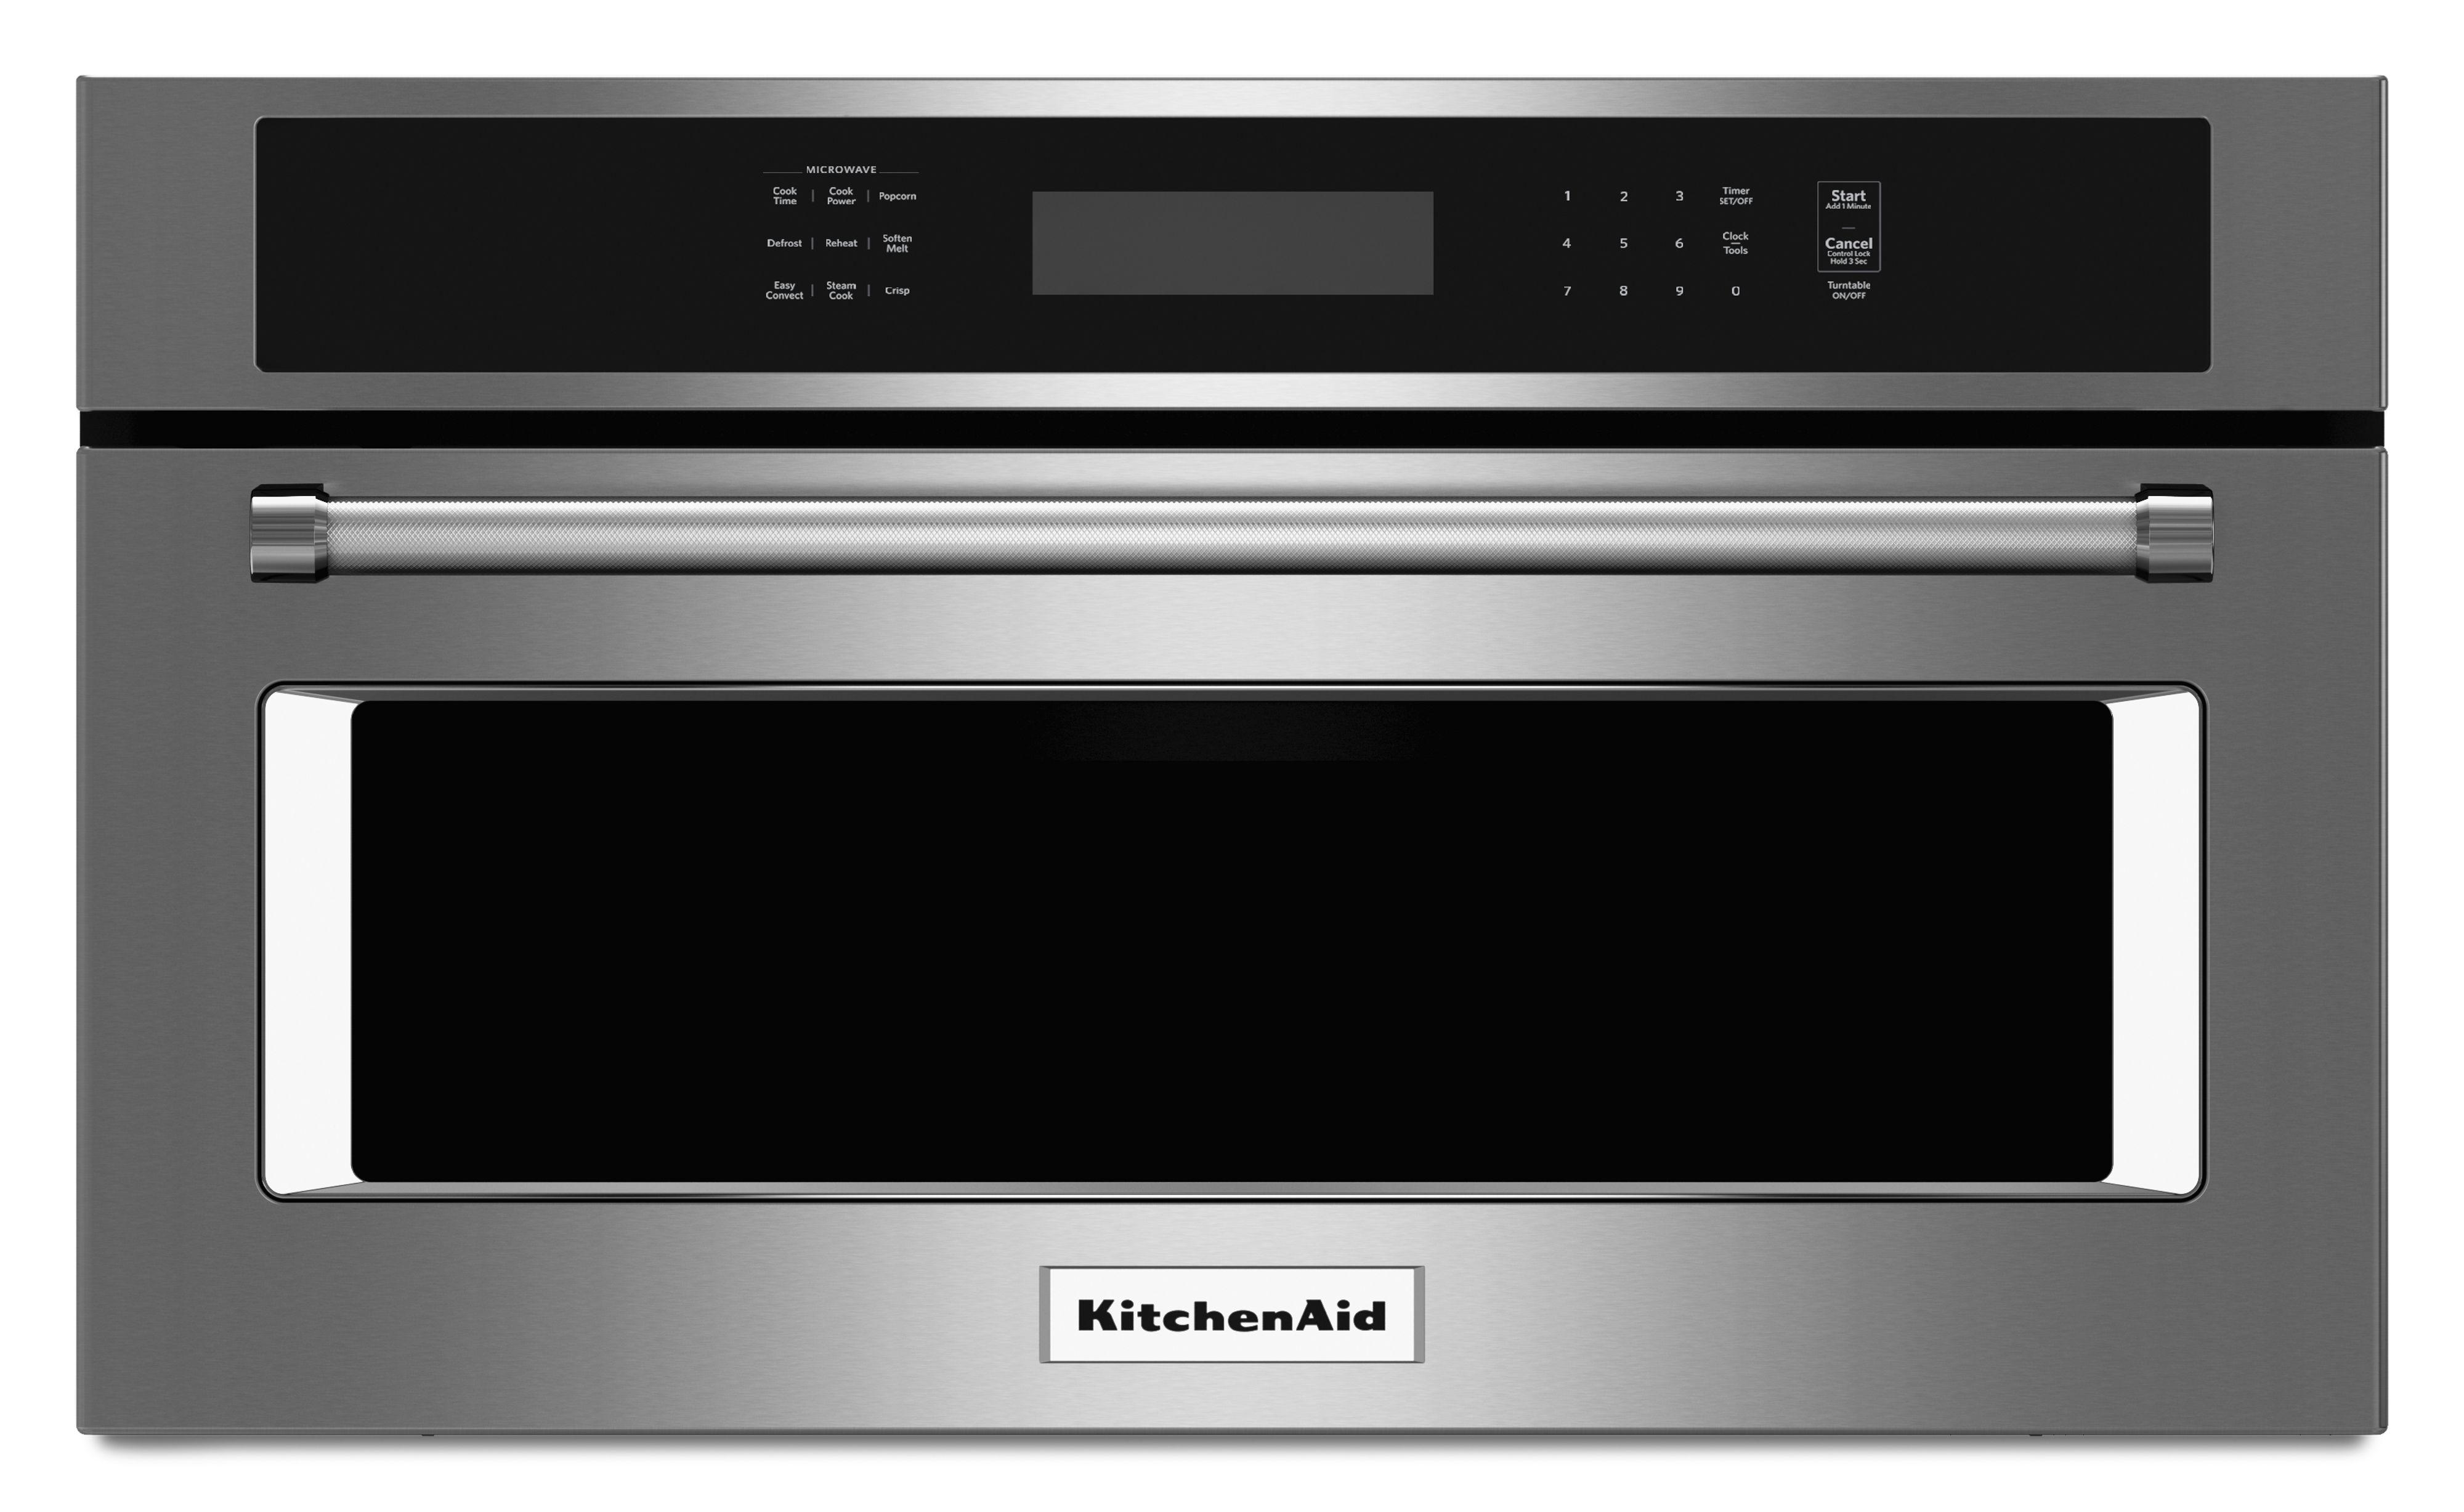 Kitchenaid KMBP107ESS 27 Inch Built-In Microwave Oven with Convection